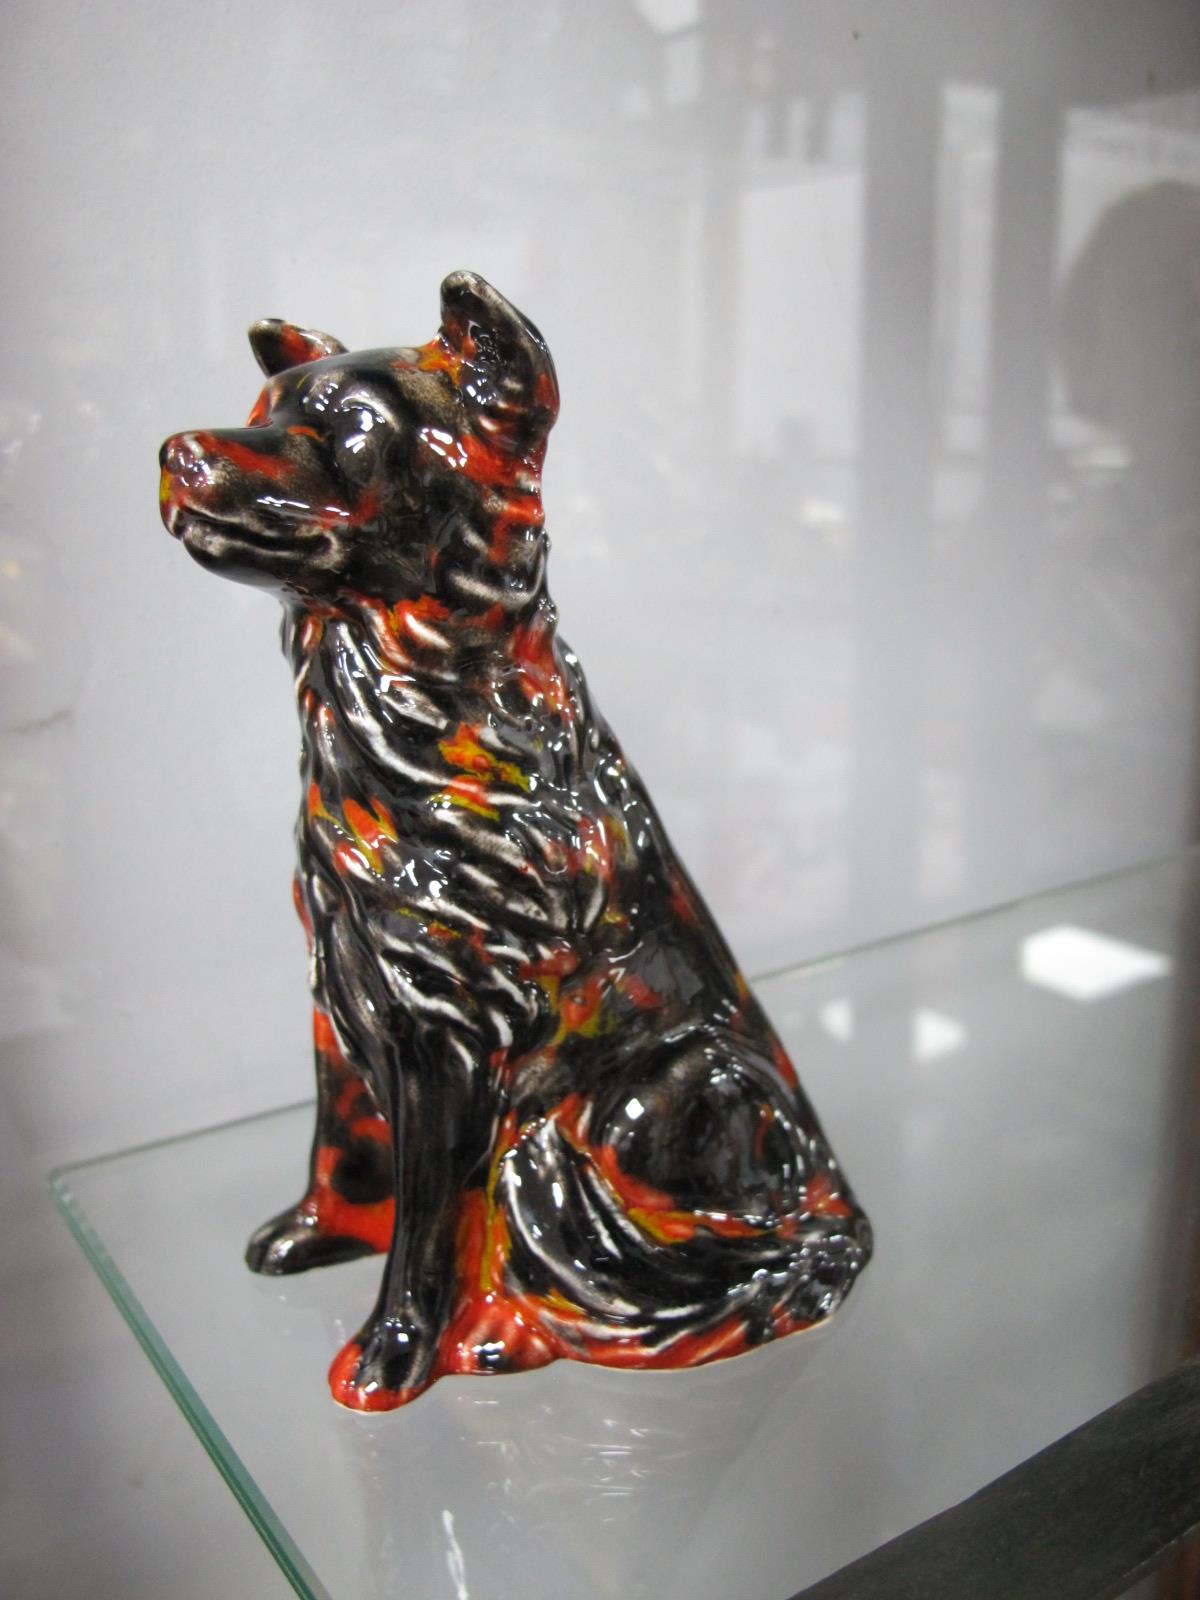 An Anita Harris Model of a Collie Dog, gold signed, 14cm high.